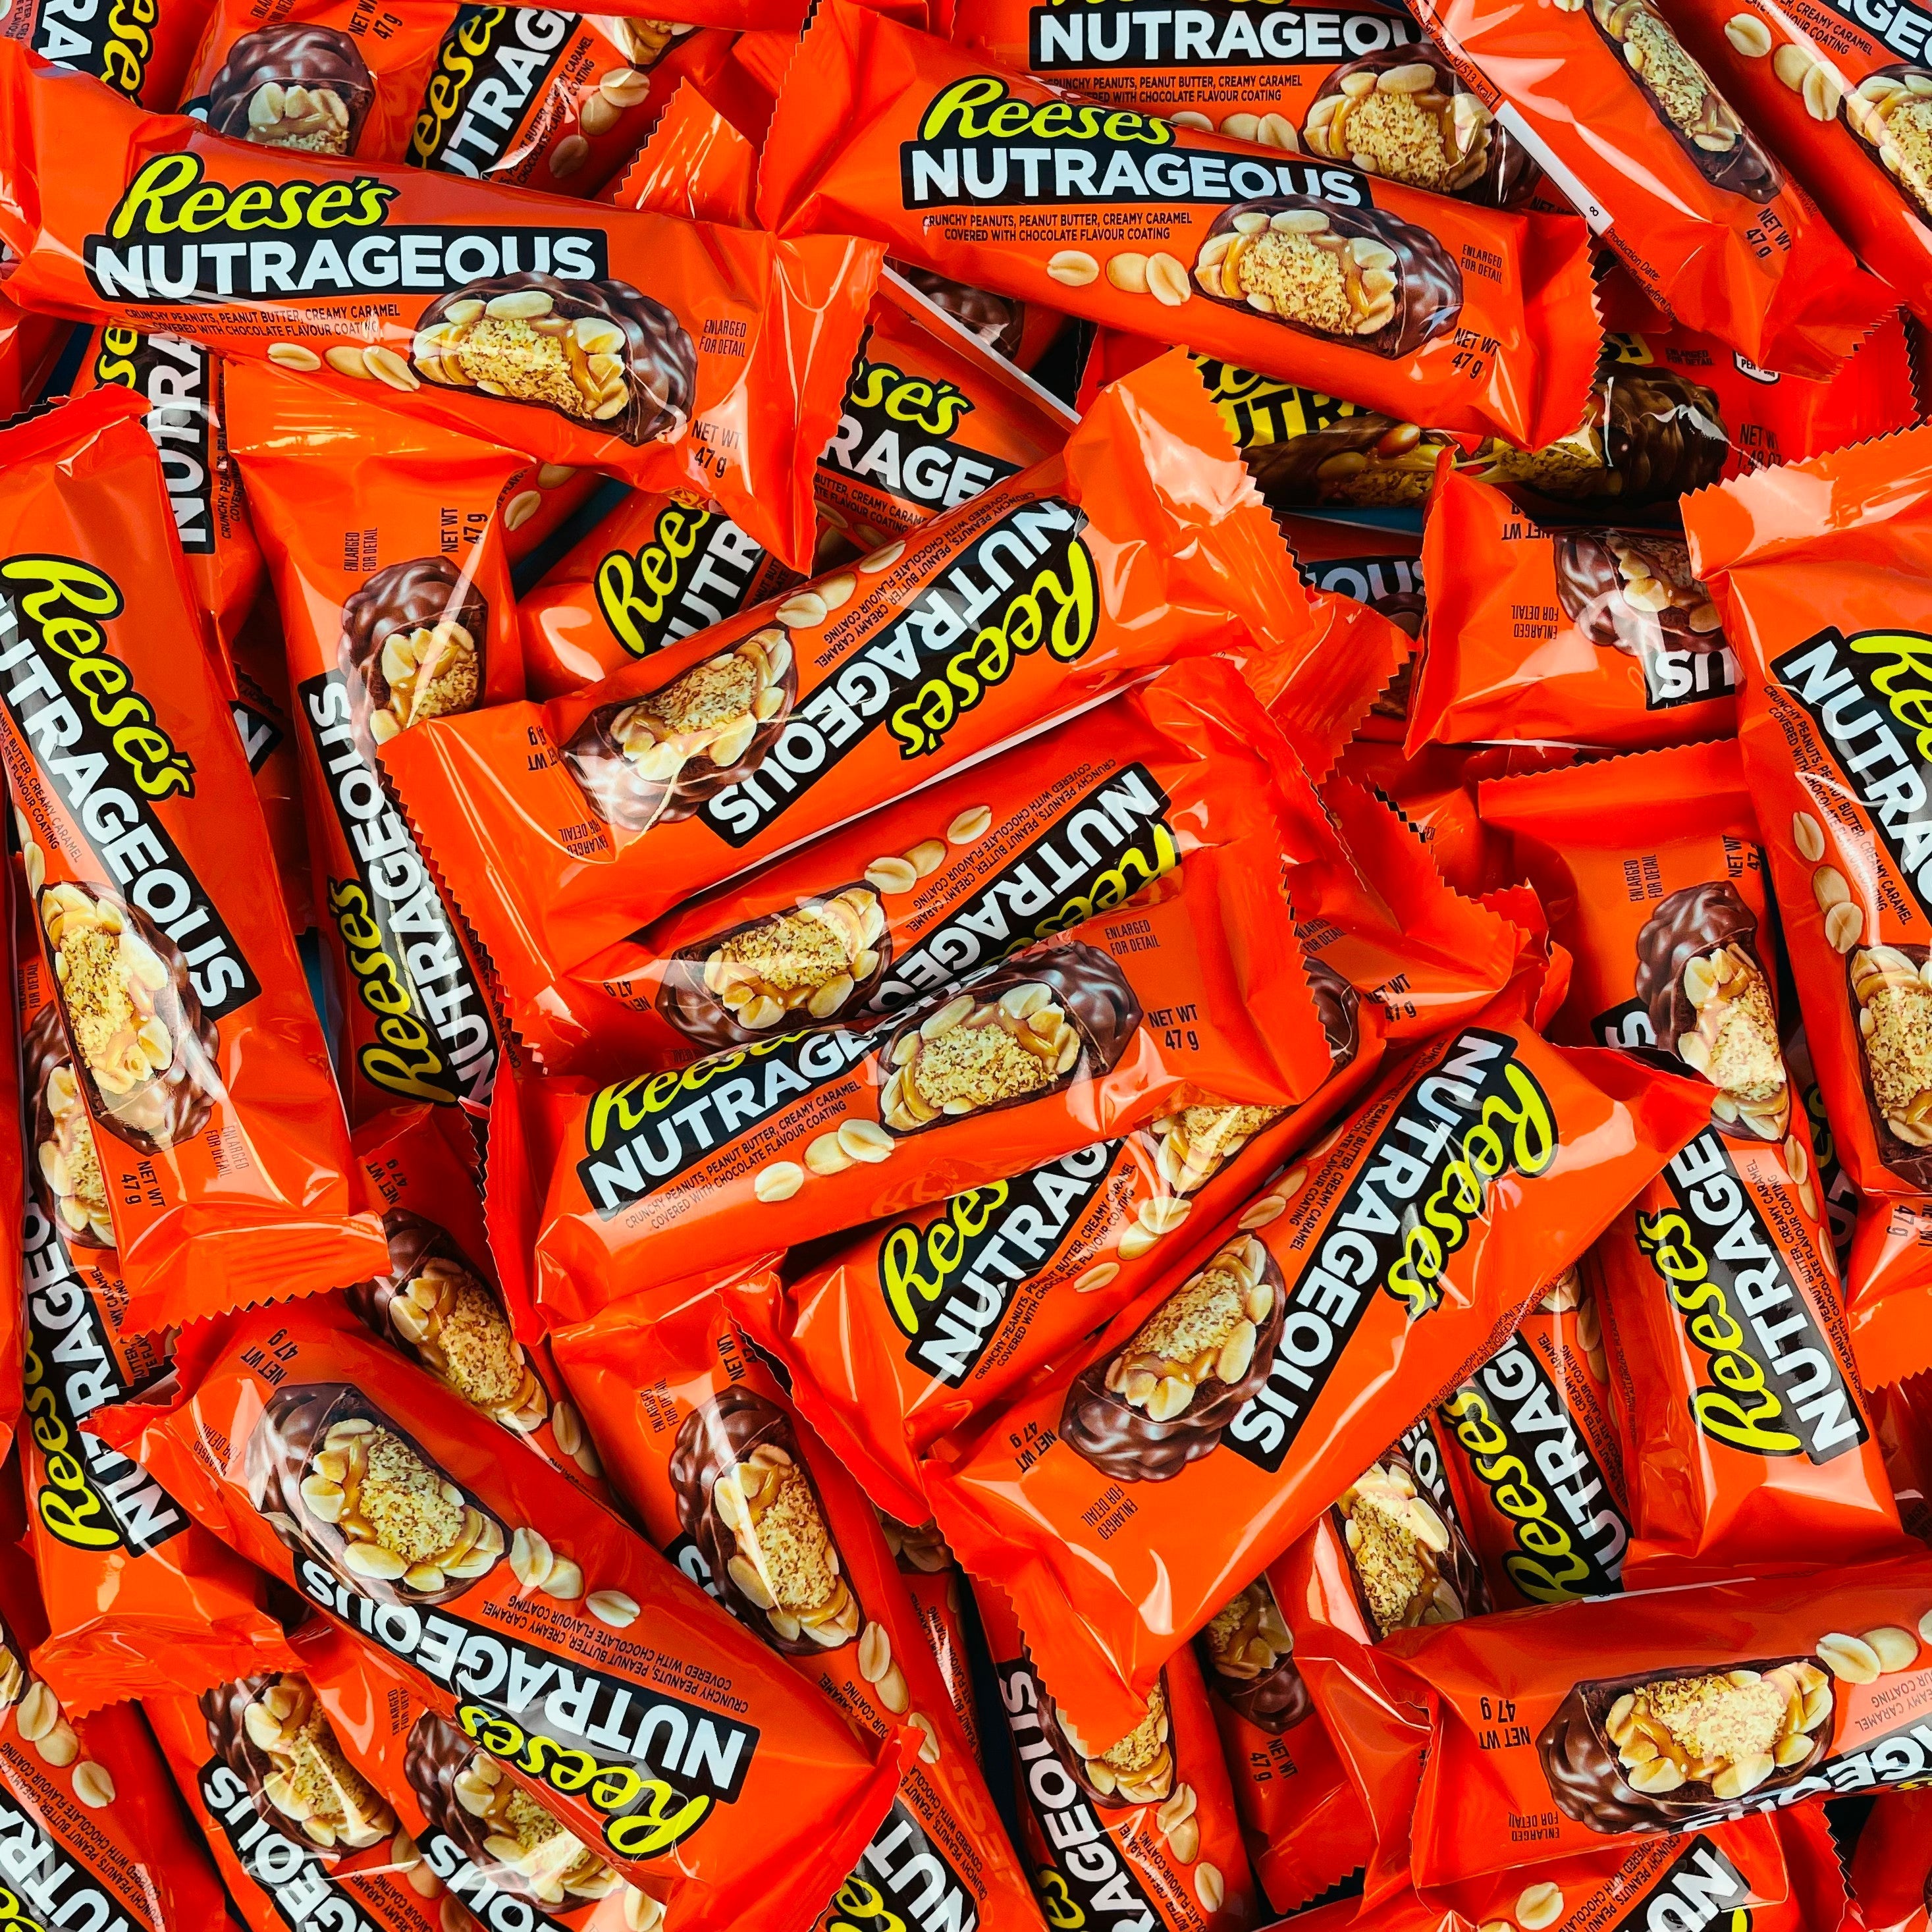 REESE'S NUTRAGEOUS - My American Shop